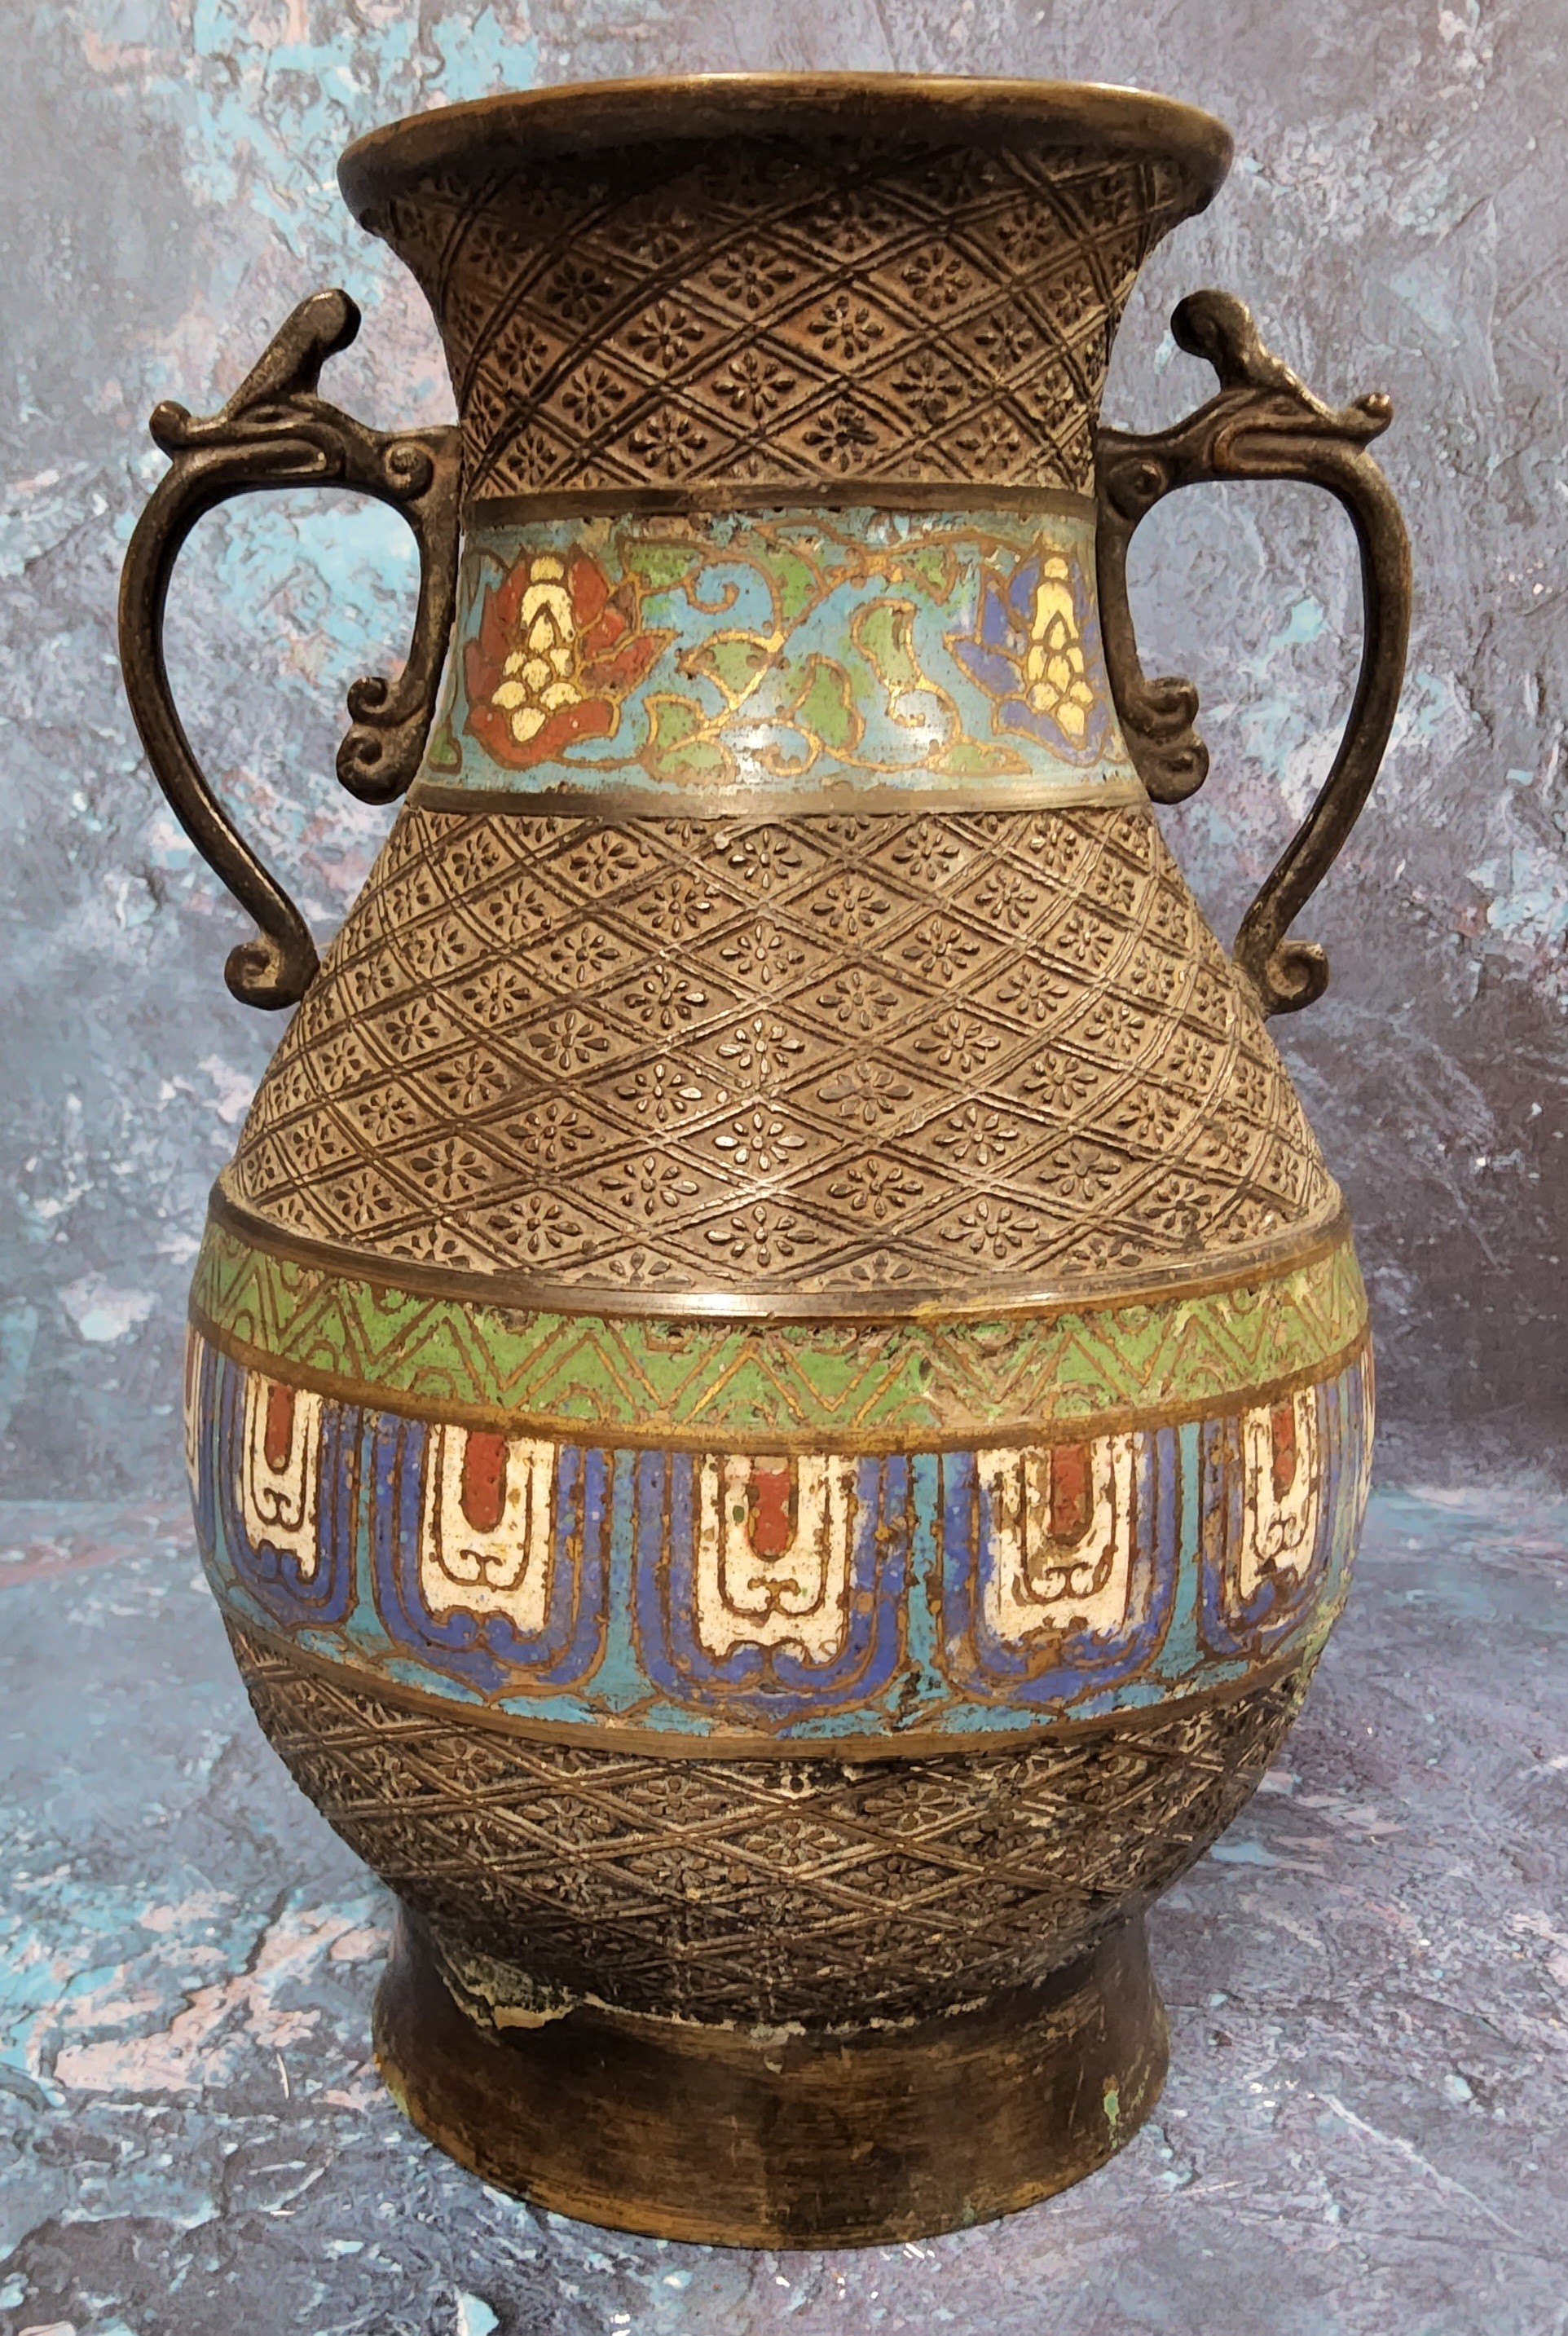 An early 20th century Japanese bronze and cloisonne two handled vase, banded with stylised flowers - Image 2 of 3